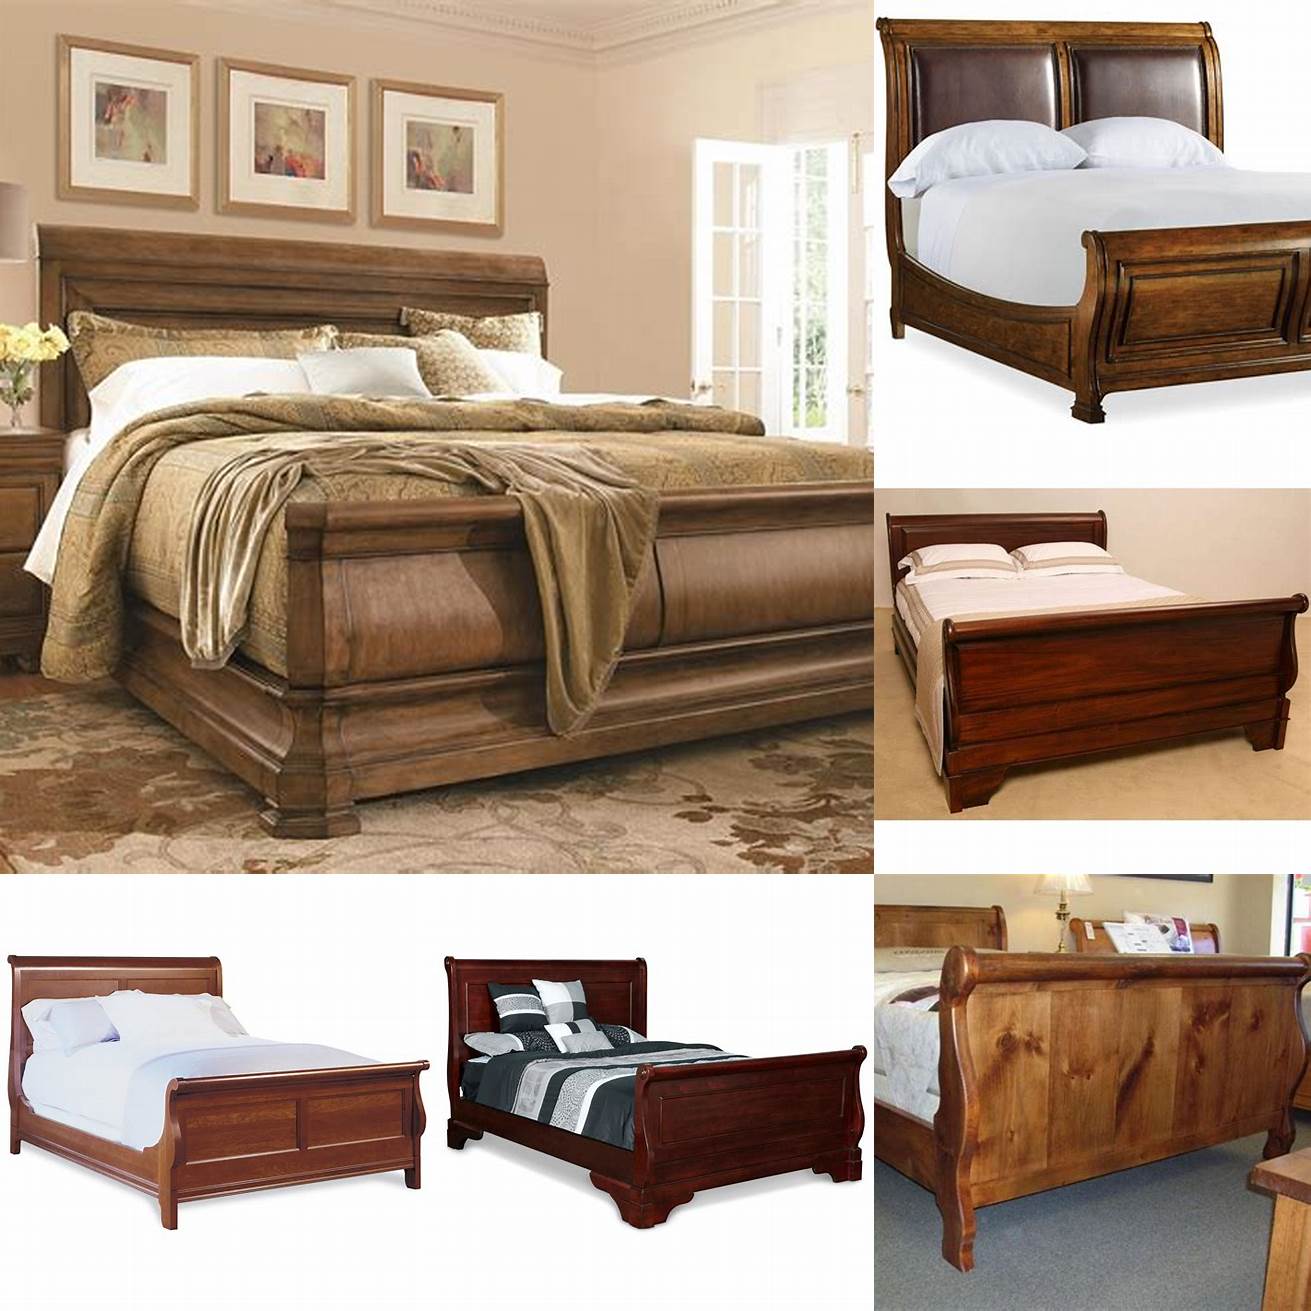 Image 1 A classic King Sleigh Bed made of solid wood